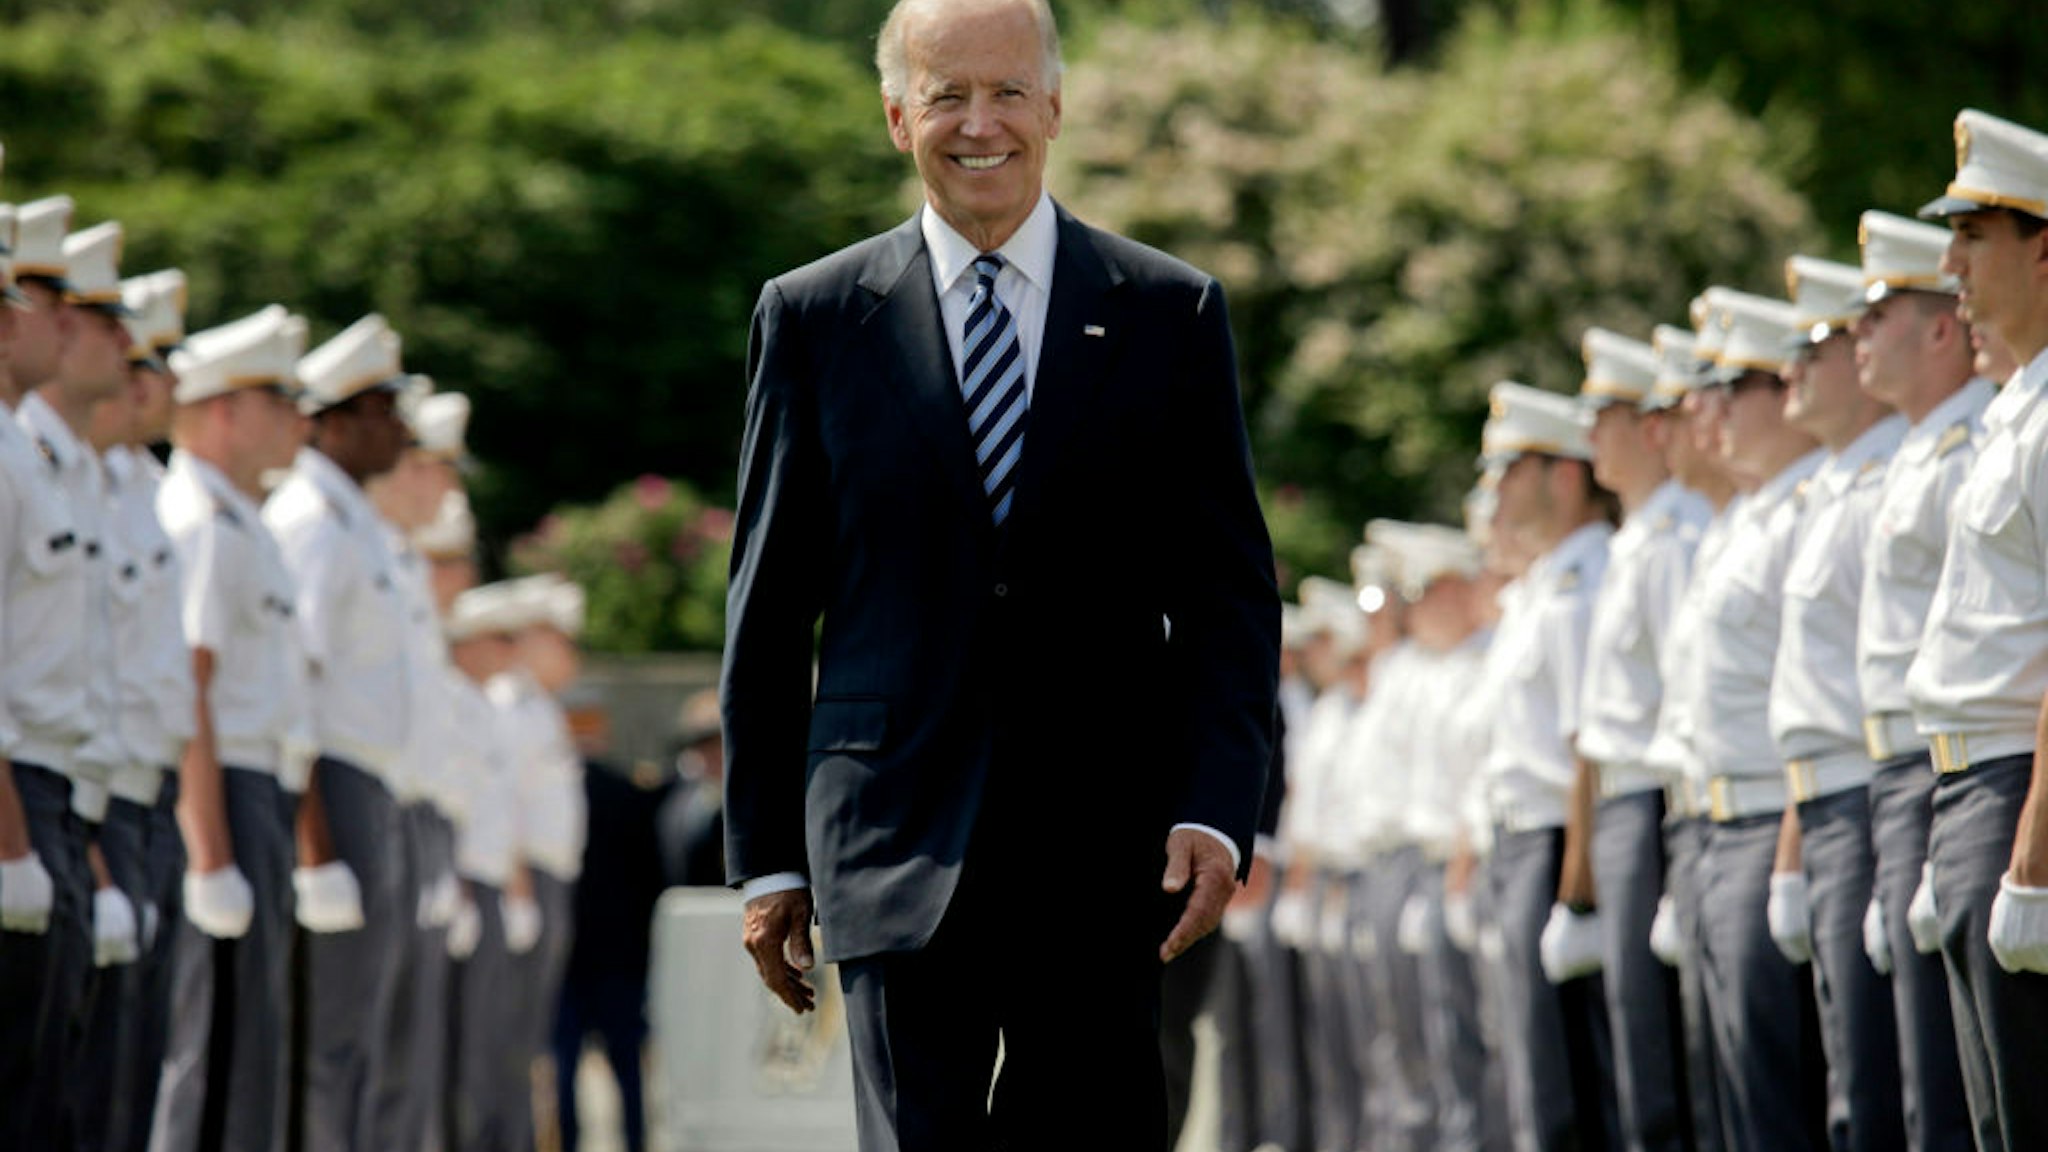 U.S. Vice President Joe Biden makes his way down a row of cadets as he arrives to address to graduates of The United States Military Academy at West Point May 26, 2012 in West Point, New York.